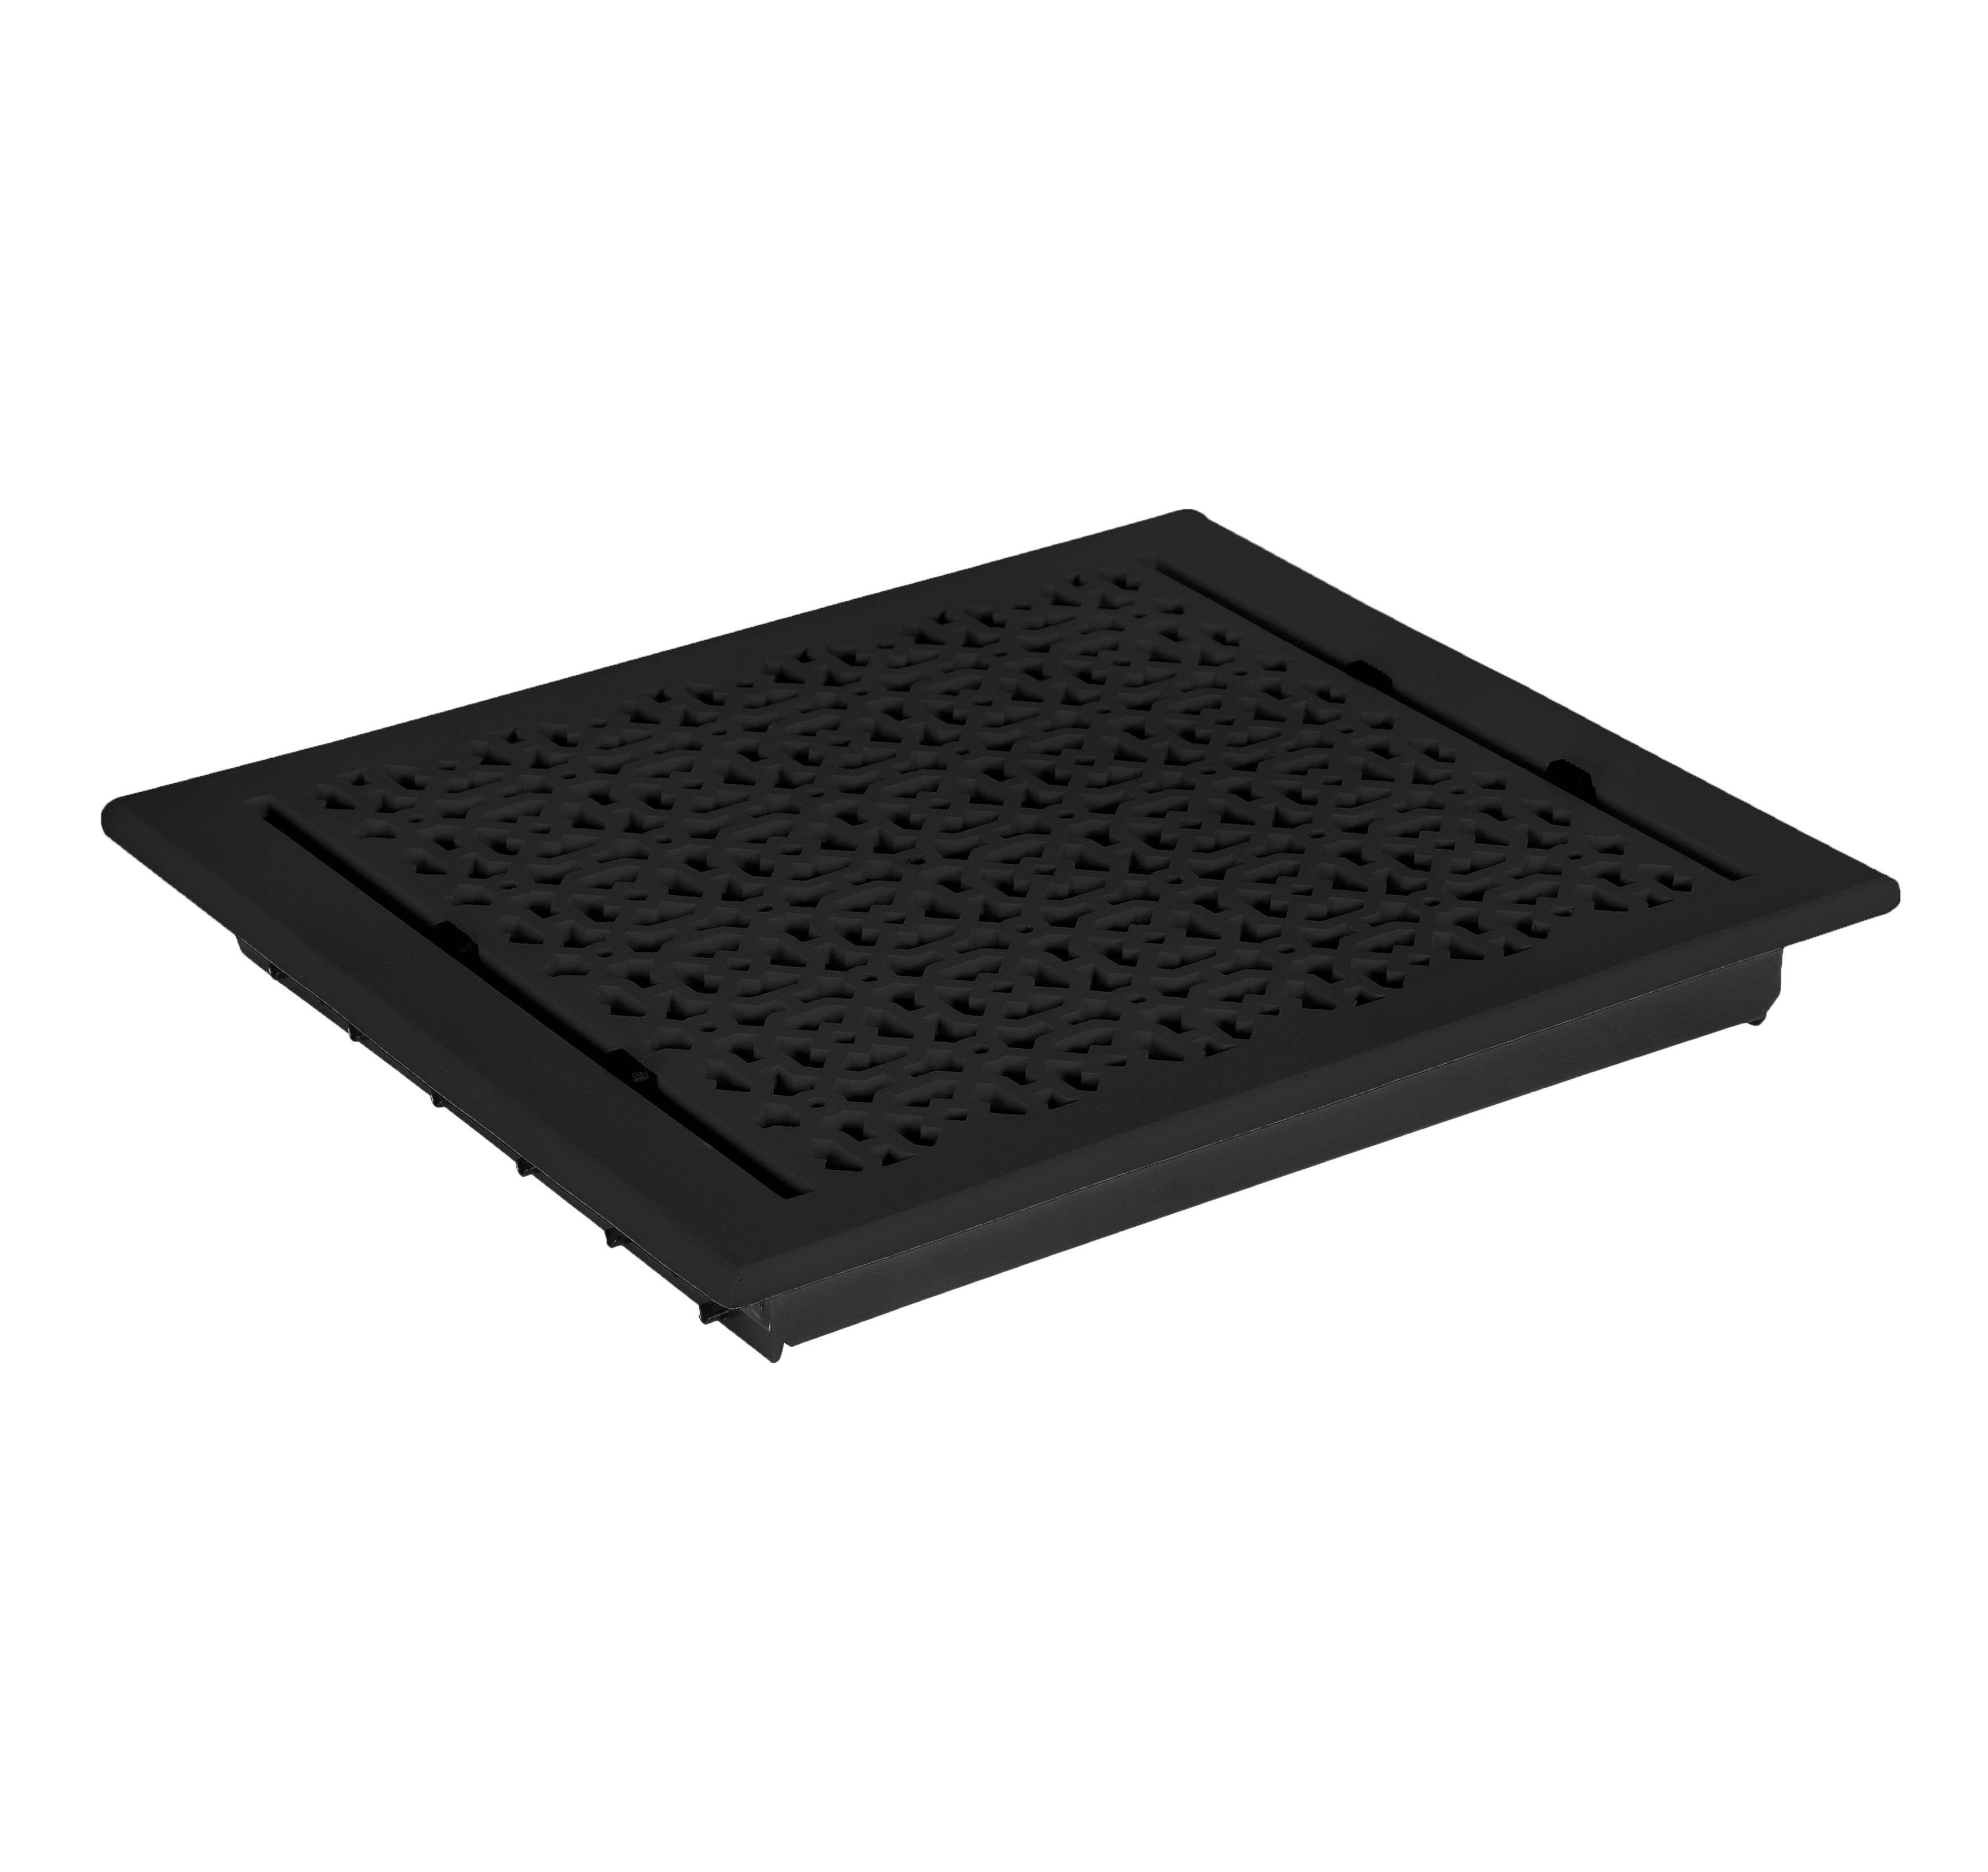 Achtek Air Supply Vent 12"x 16" Duct Opening (Overall 13-1/2"x 17-1/2"") Solid Cast Aluminium Register Cover | Powder Coated